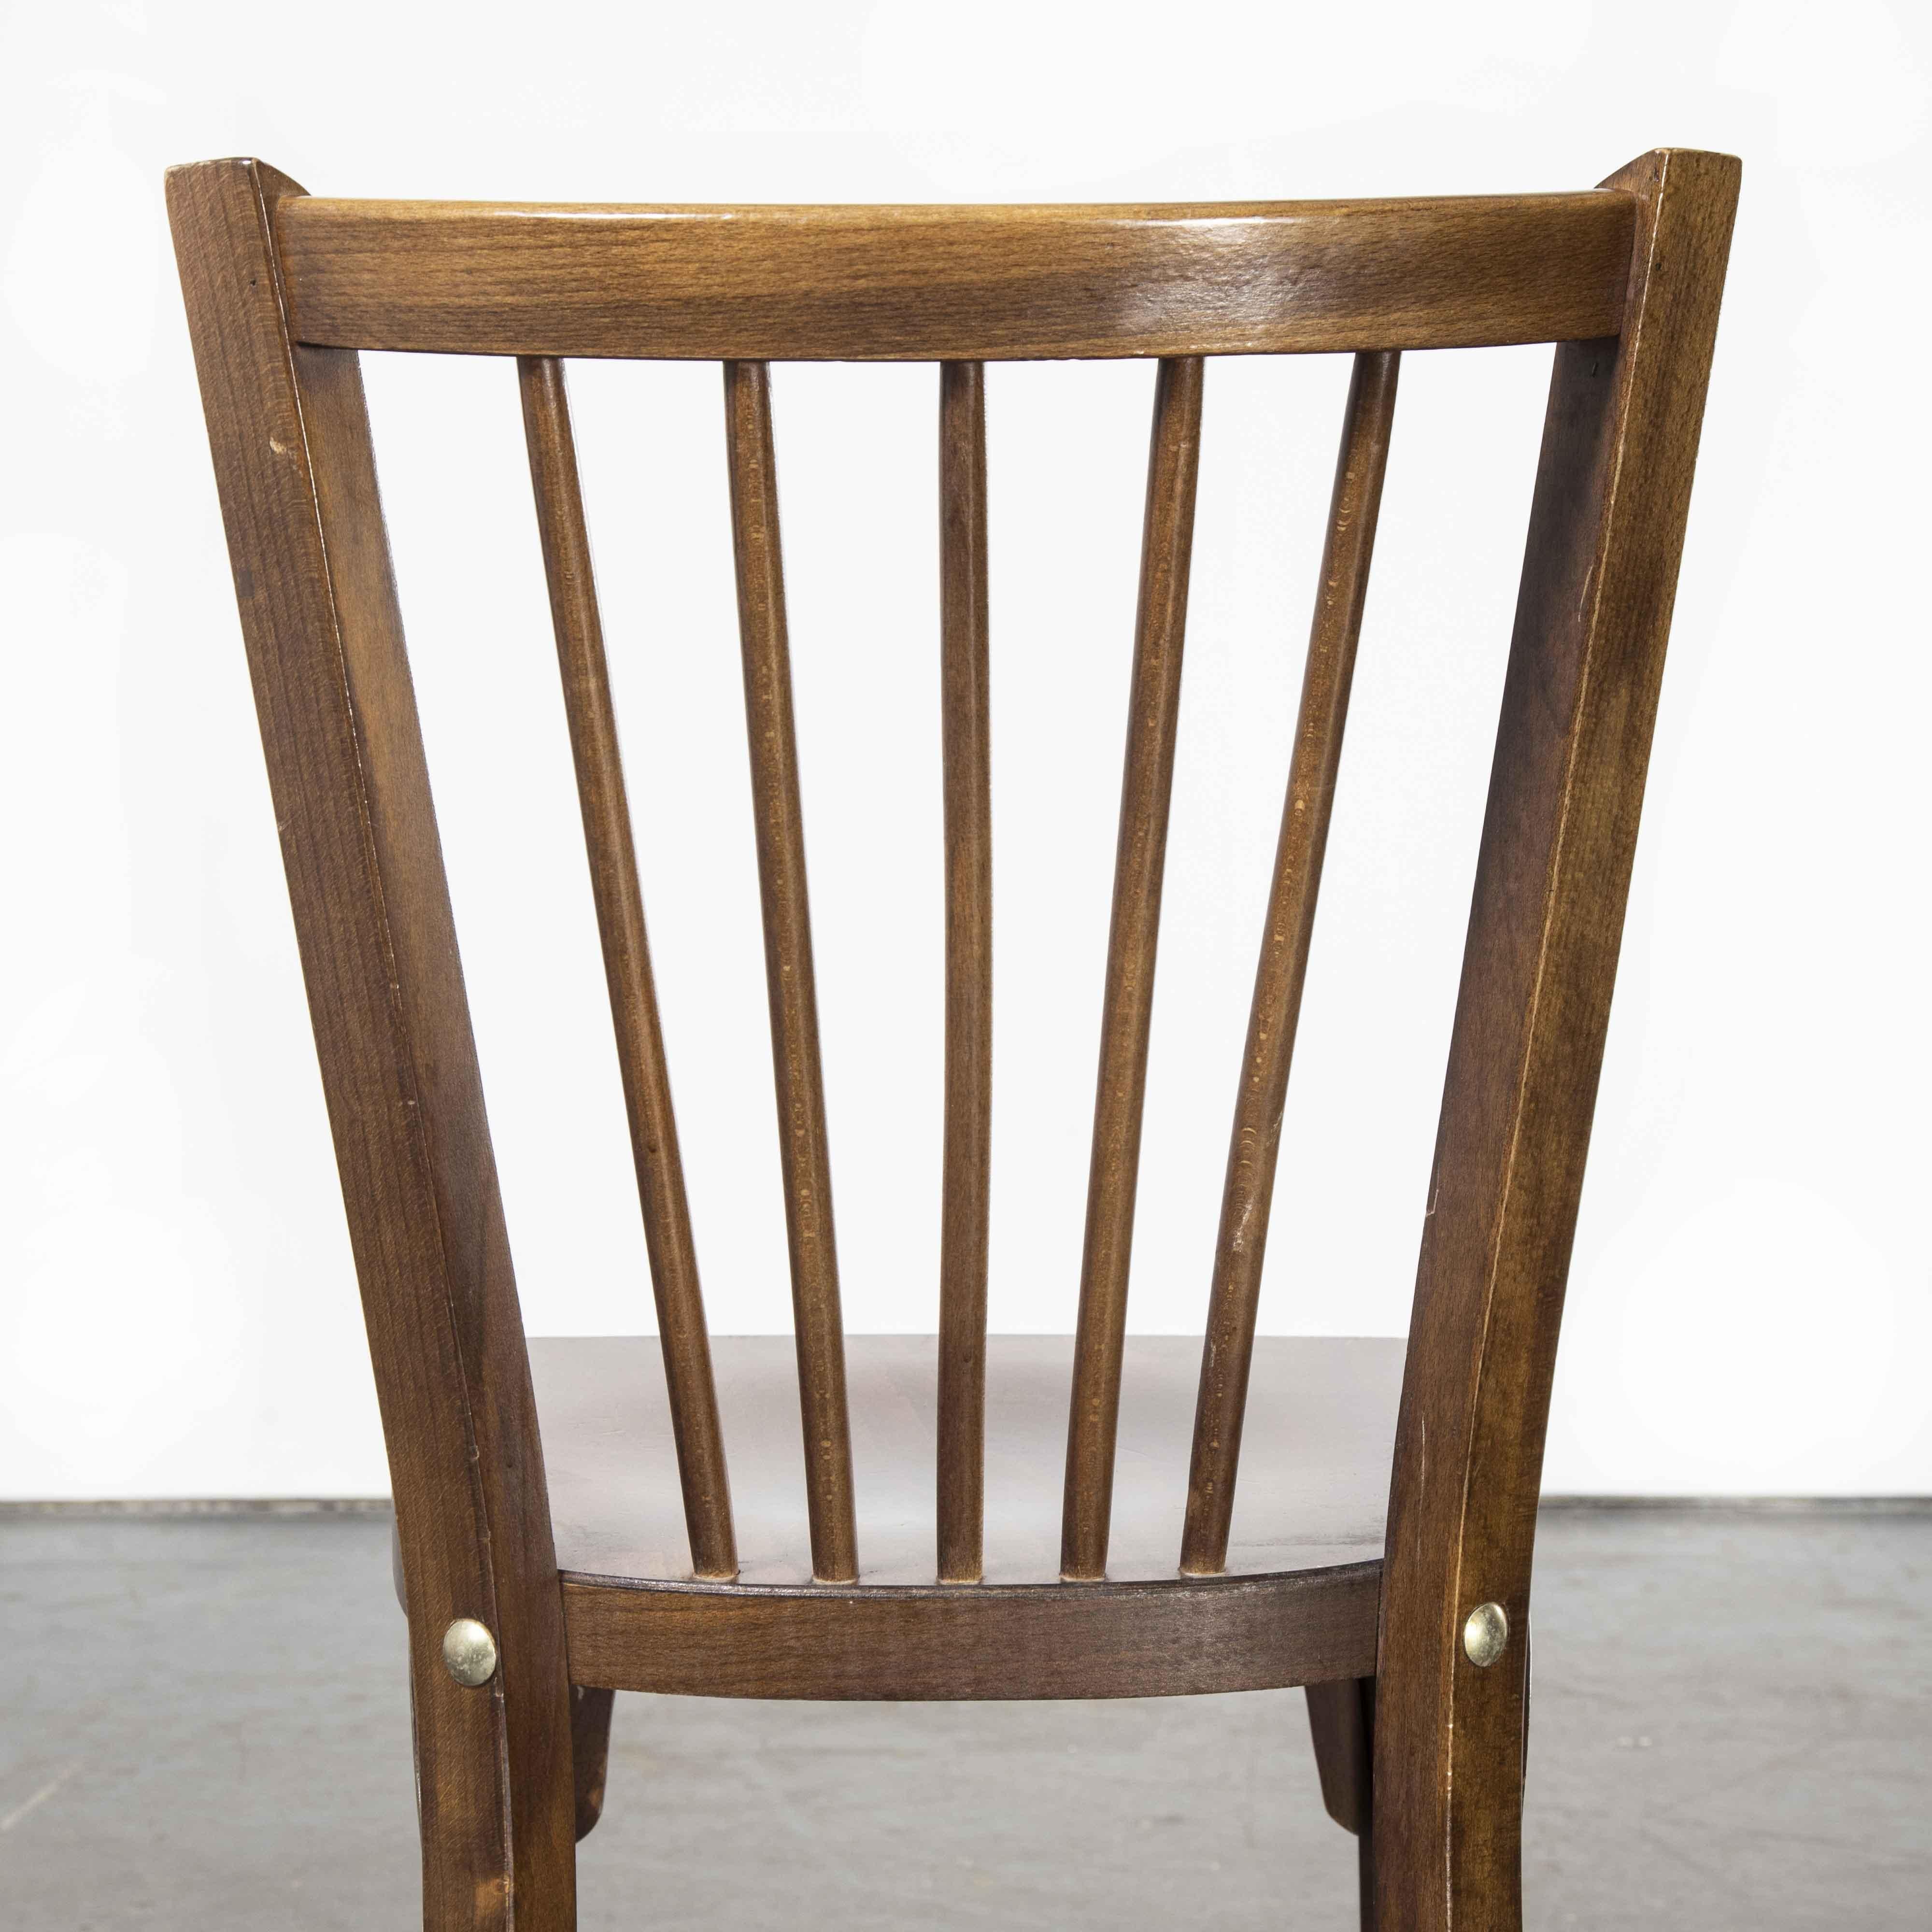 1960’s Baumann bentwood Classic stickback bistro dining chair – various quantities available

1960’s Baumann bentwood Classic stick back bistro dining chair – various quantities available. Classic beech bistro chair made in France by the maker